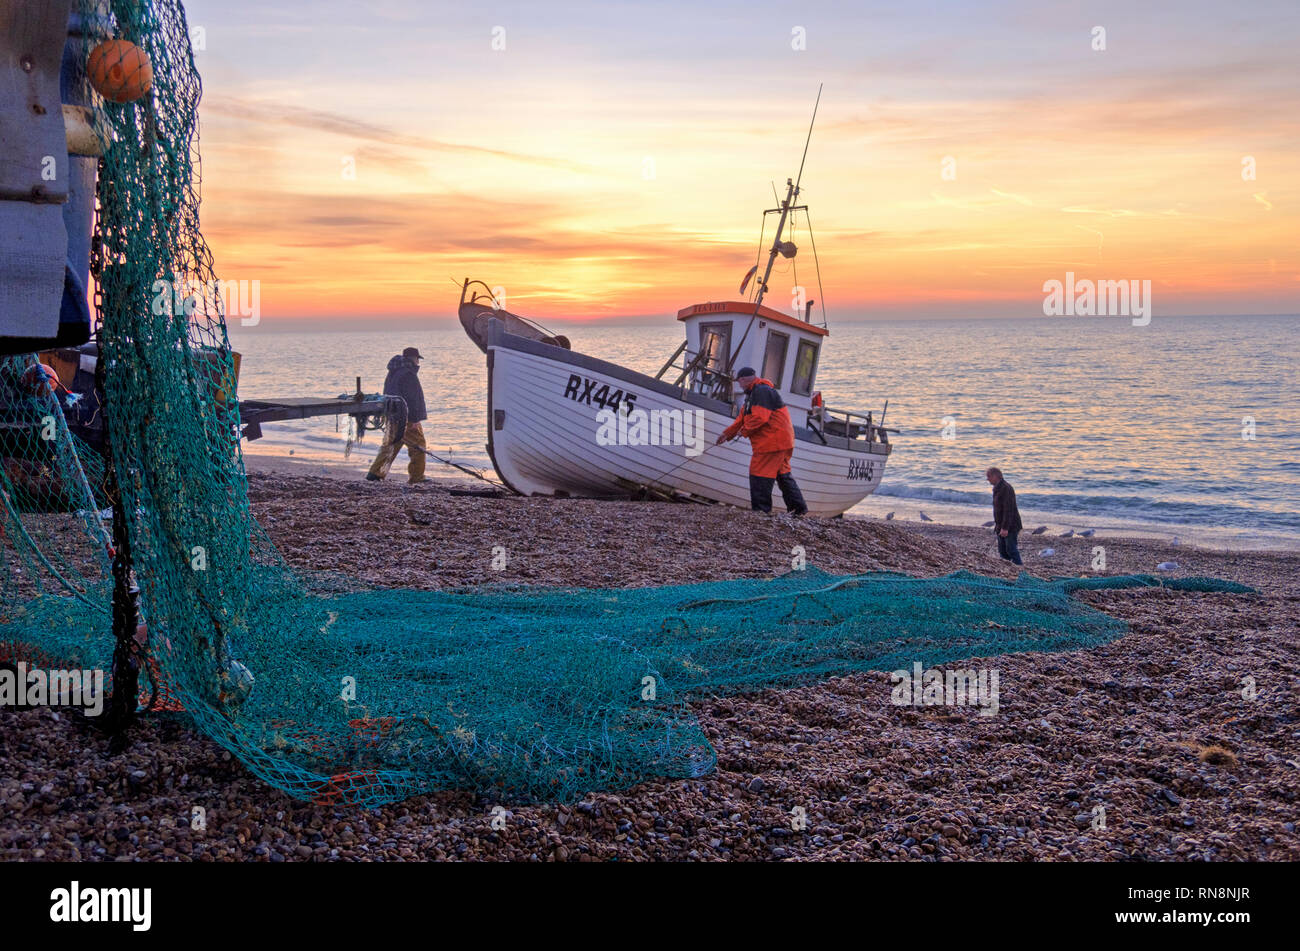 Hastings, East Sussex, UK. Hastings fishing boat being launched at sunrise. Hastings has the largest beach-launched fishing fleet in Europe. Stock Photo